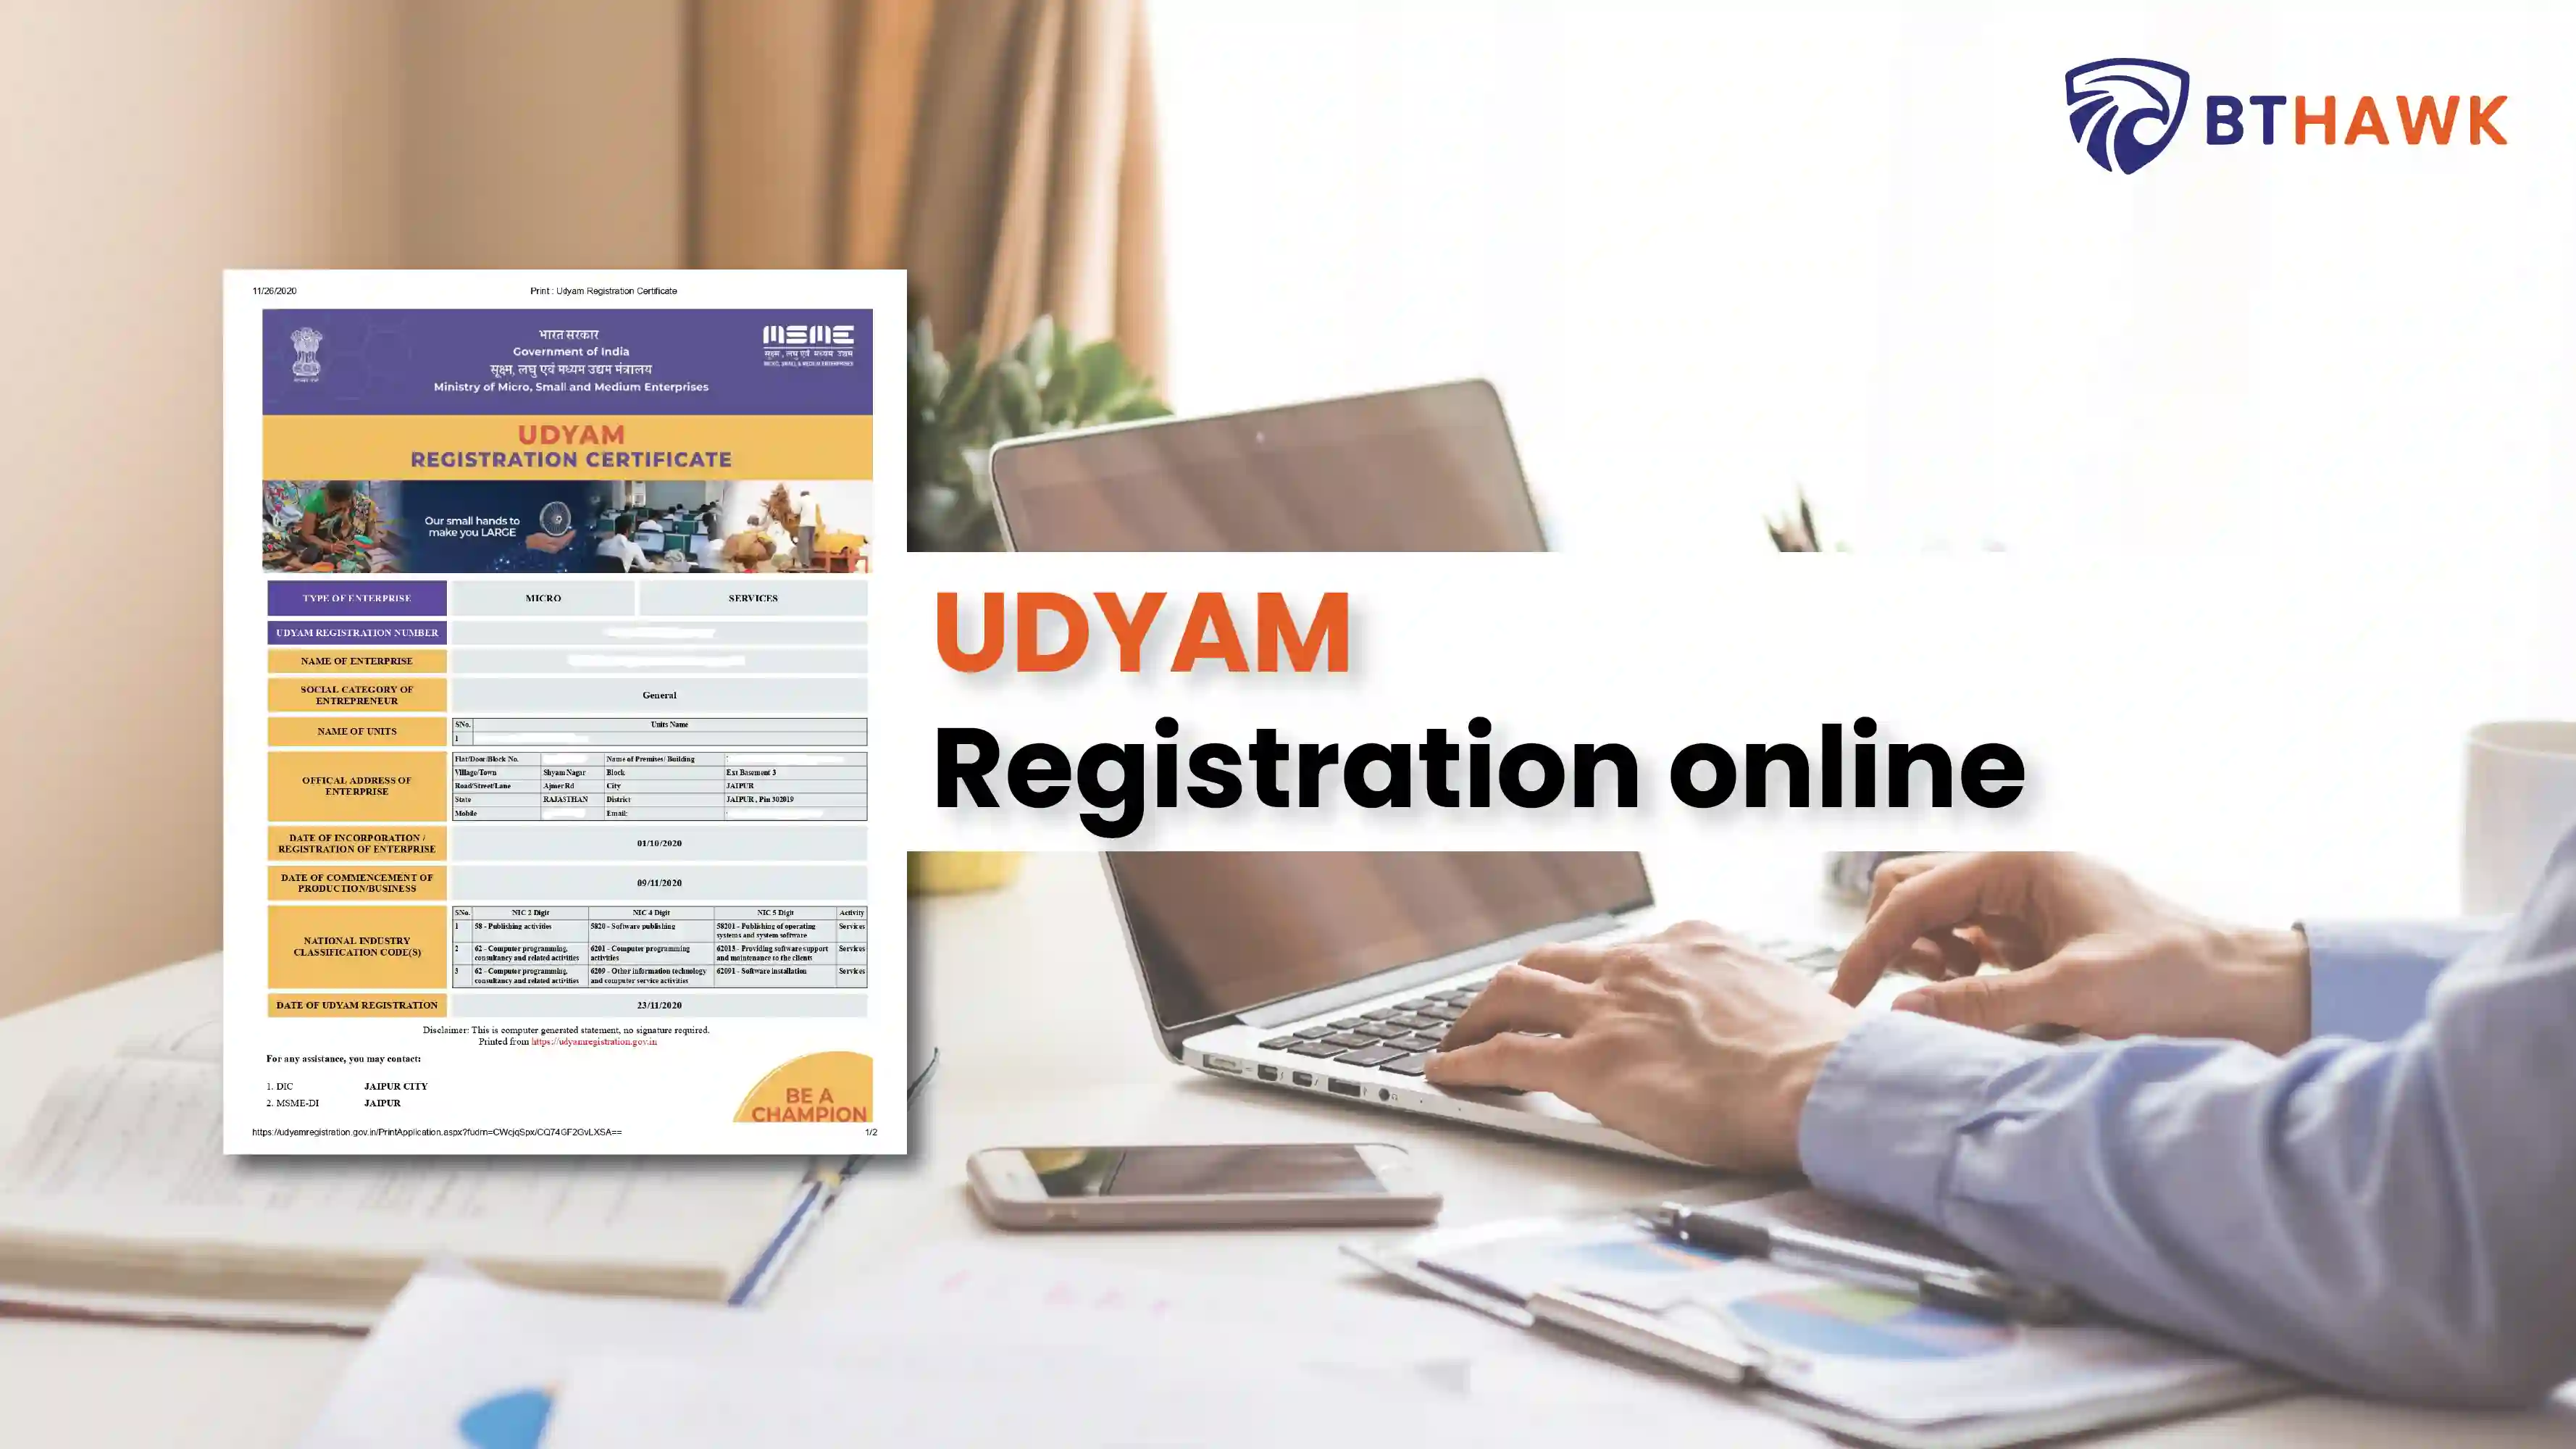 udyam-registration-guide-required-documents-and-registration-process-1718616457